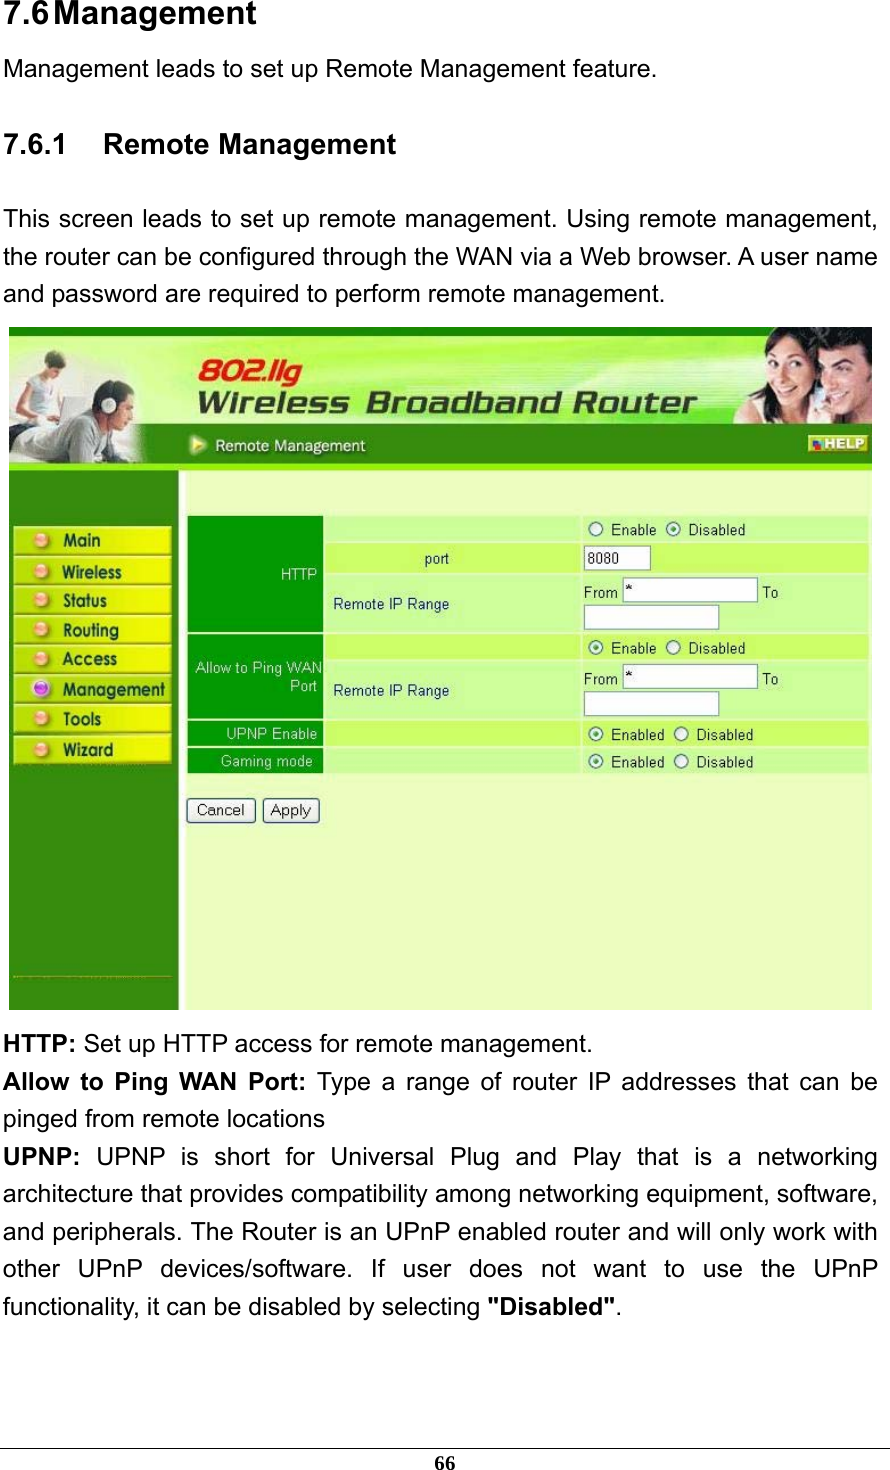 7.6 Management Management leads to set up Remote Management feature. 7.6.1 Remote Management This screen leads to set up remote management. Using remote management, the router can be configured through the WAN via a Web browser. A user name and password are required to perform remote management.  HTTP: Set up HTTP access for remote management. Allow to Ping WAN Port: Type a range of router IP addresses that can be pinged from remote locations UPNP:  UPNP is short for Universal Plug and Play that is a networking architecture that provides compatibility among networking equipment, software, and peripherals. The Router is an UPnP enabled router and will only work with other UPnP devices/software. If user does not want to use the UPnP functionality, it can be disabled by selecting &quot;Disabled&quot;.   66 